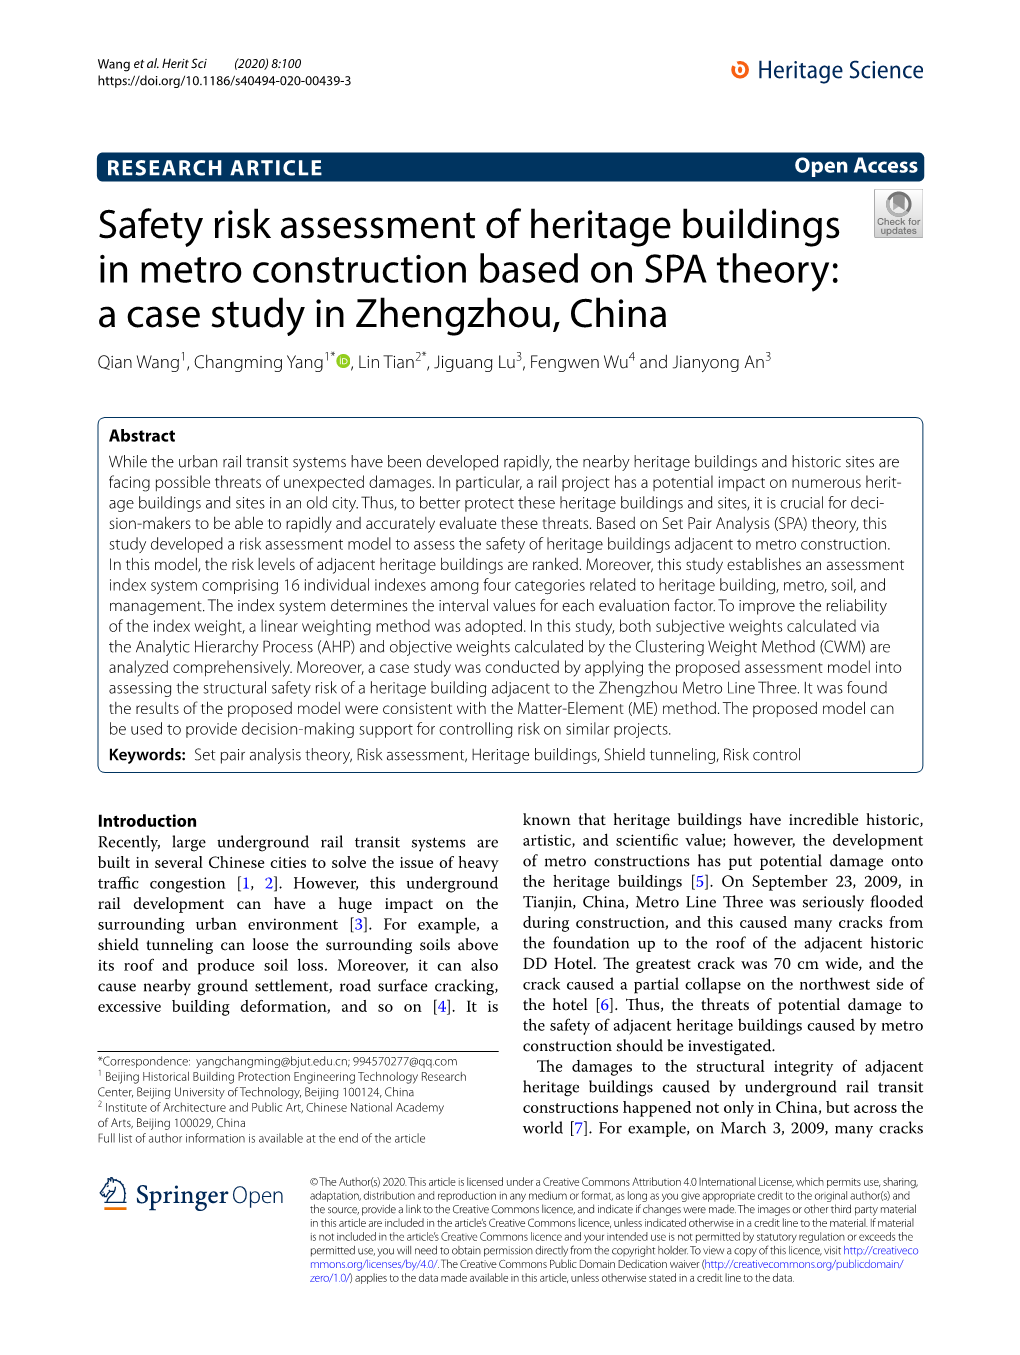 Safety Risk Assessment of Heritage Buildings in Metro Construction